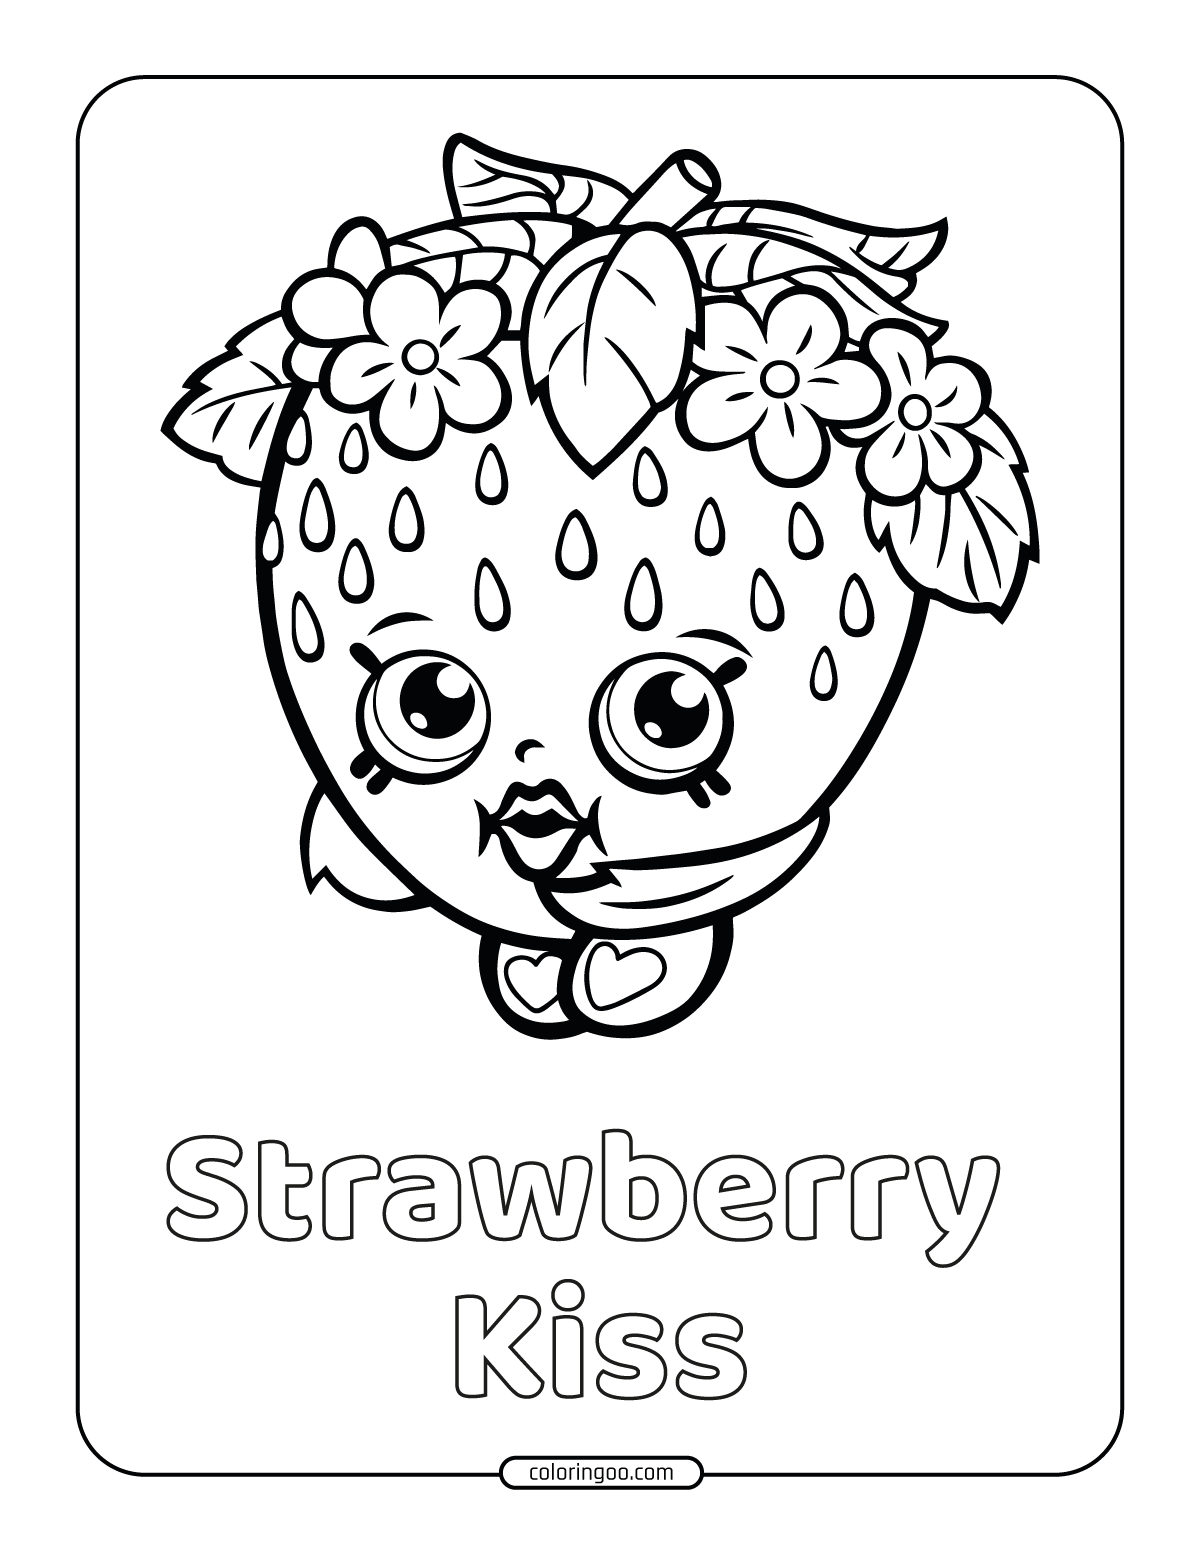 strawberry kiss shopkins coloring pages